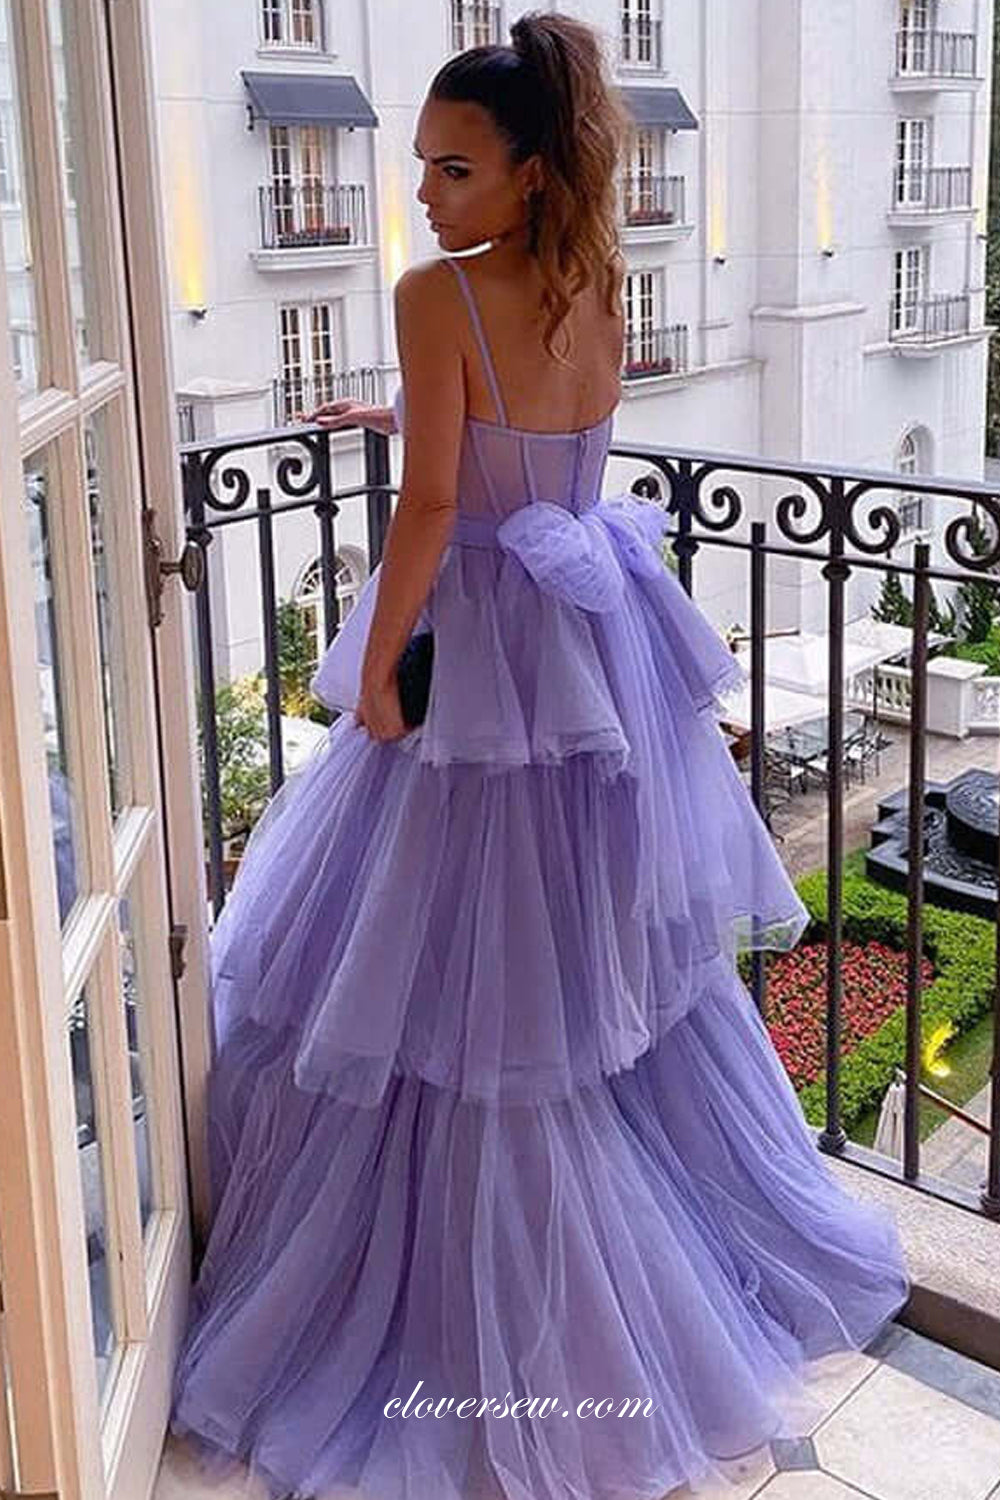 Lilac Tulle Tiered Spaghetti Strap Sweetheart Elegant Prom Dresses, CP0829